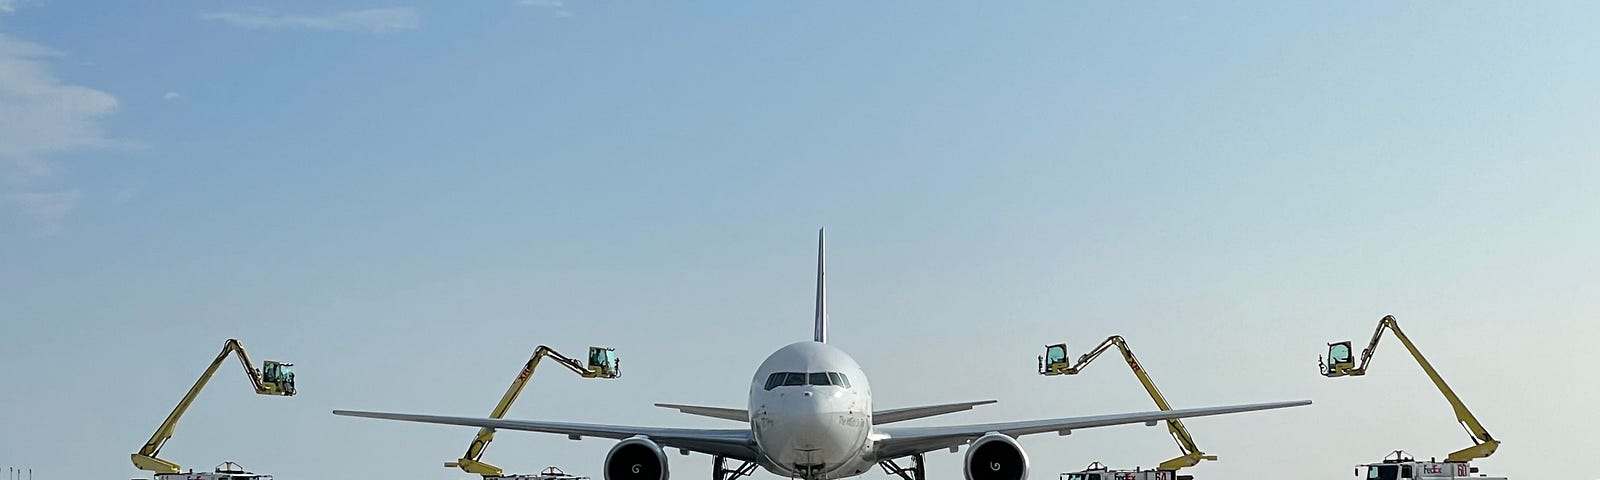 A FedEx aircraft on the de-icing pade, surrounded by de-icing vehicles.